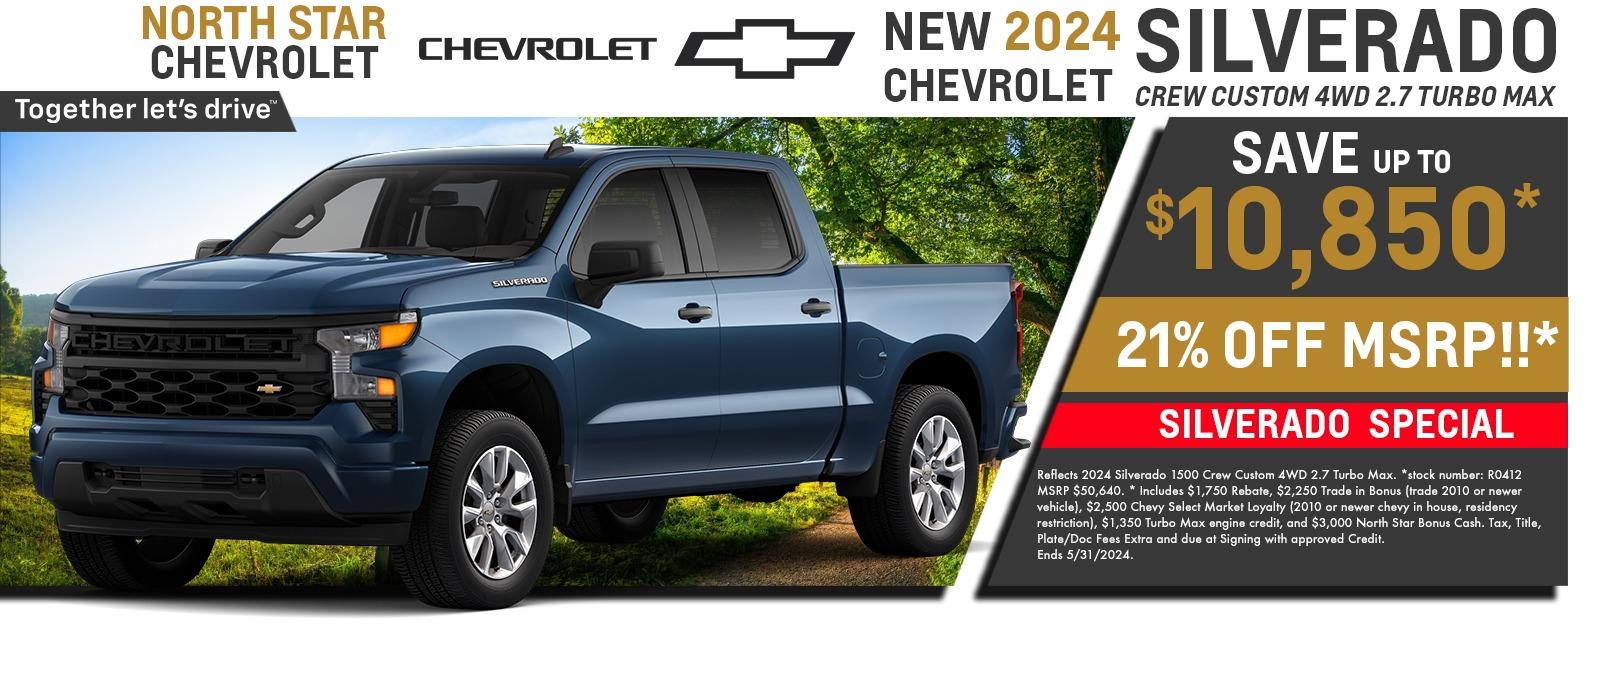 2024 Chevy Silverado save up to $10,850  21% off MSRP